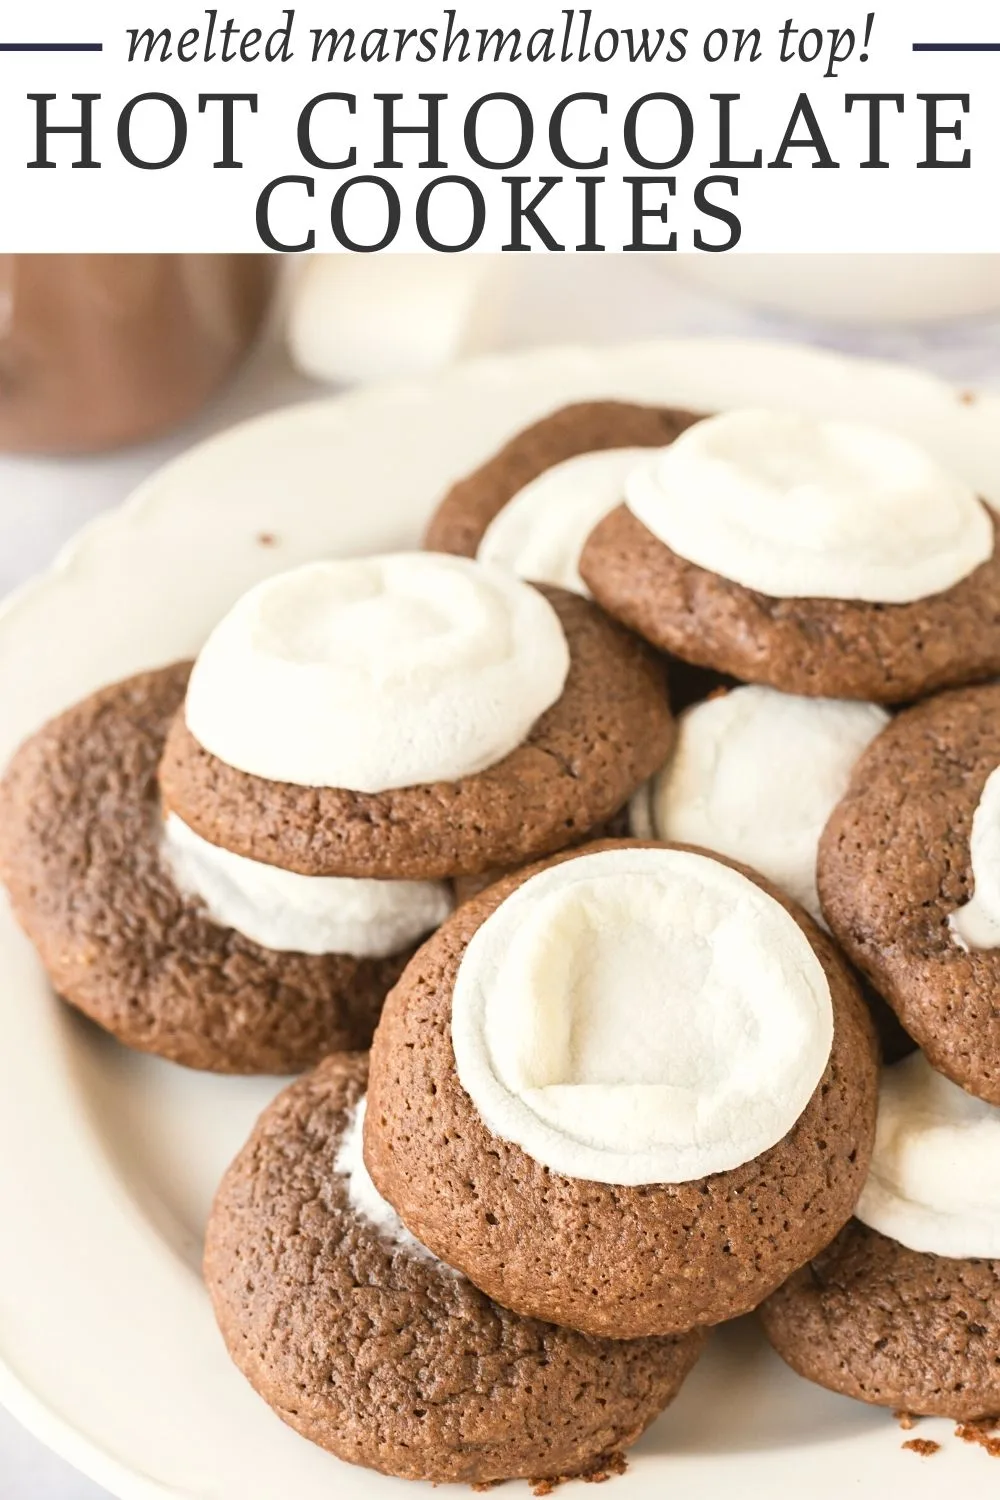 These hot chocolate cookies don't just taste like hot chocolate with marshmallows on top, they actually have hot chocolate mix baked right inside. They are soft, and oh so delicious. If you love hot cocoa, these are the cookies for you!